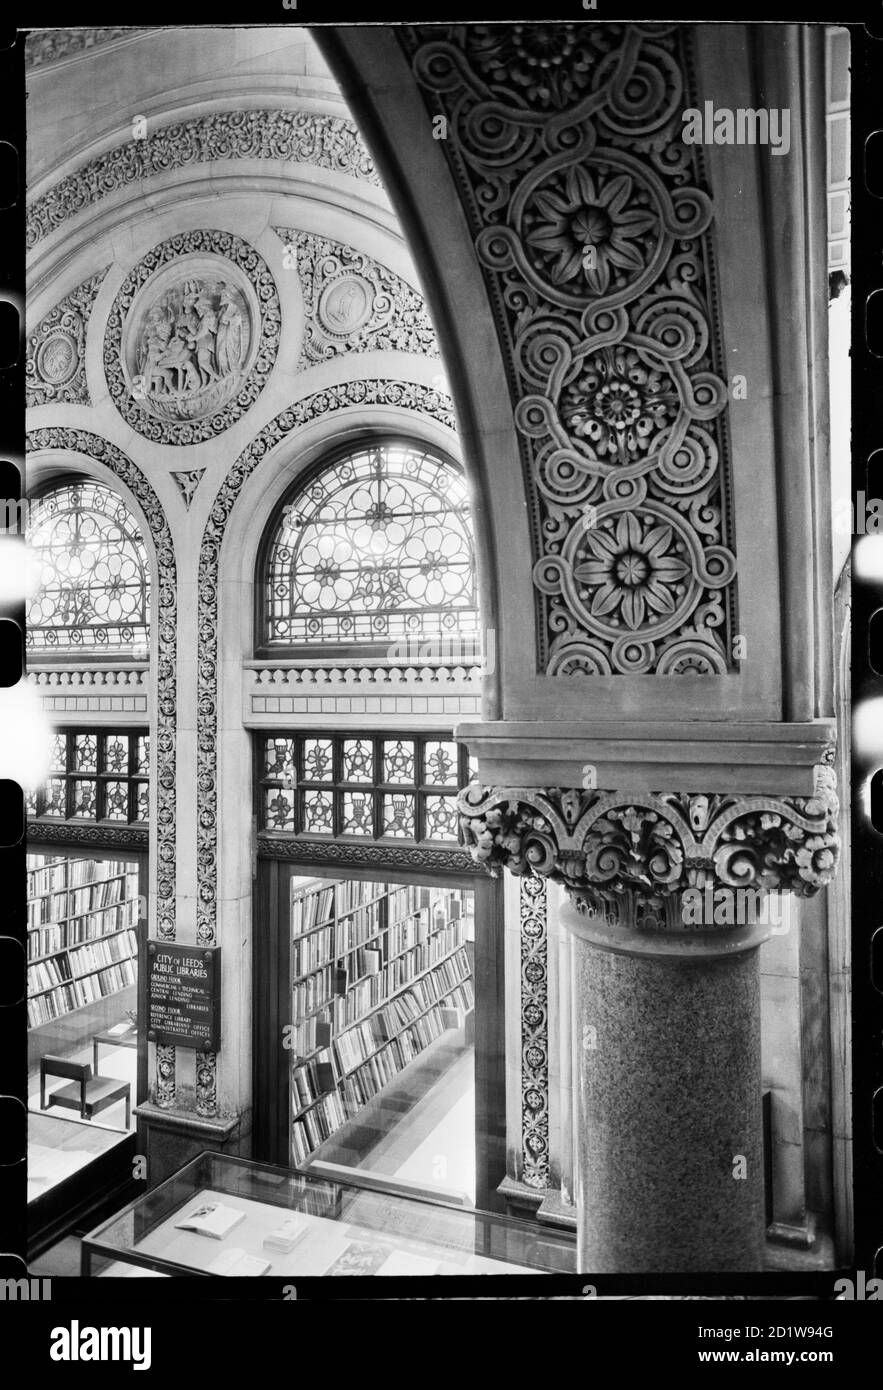 Interior of a historic building, double-arched entrance to a ground floor library room, showing the underside of an ornately carved arch Stock Photo